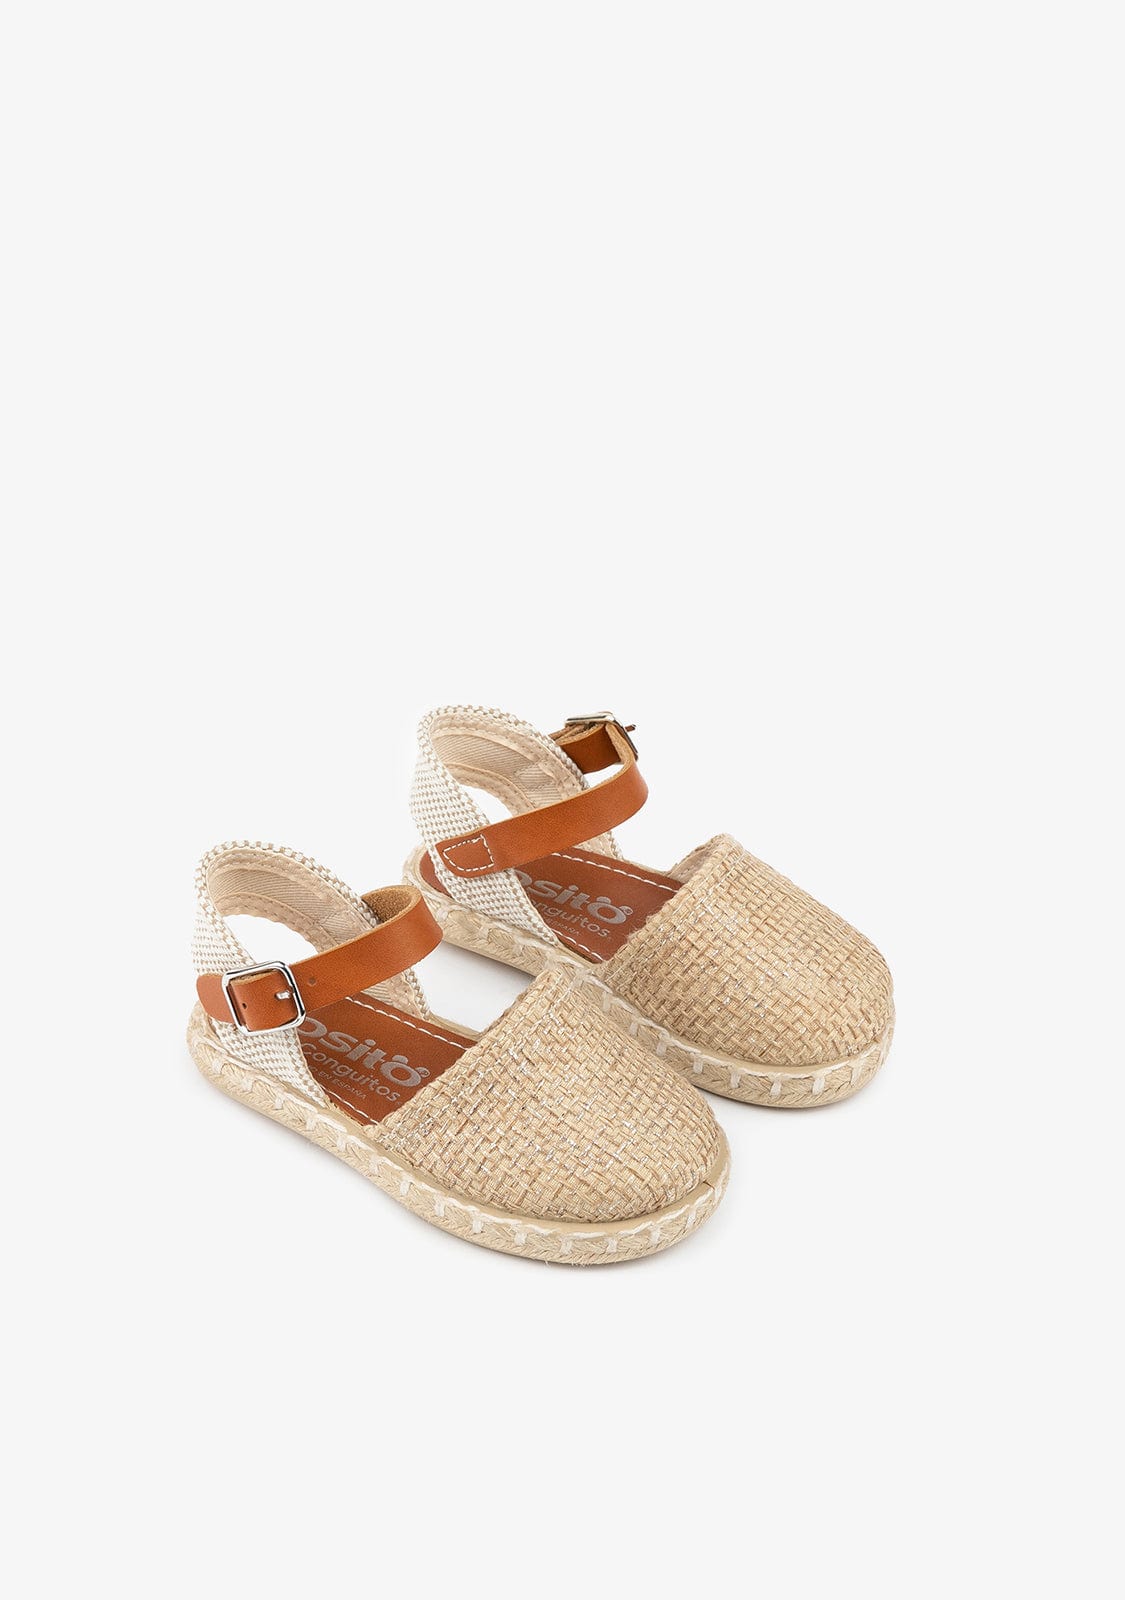 OSITO Shoes Baby's Metalized Beige Espadrilles